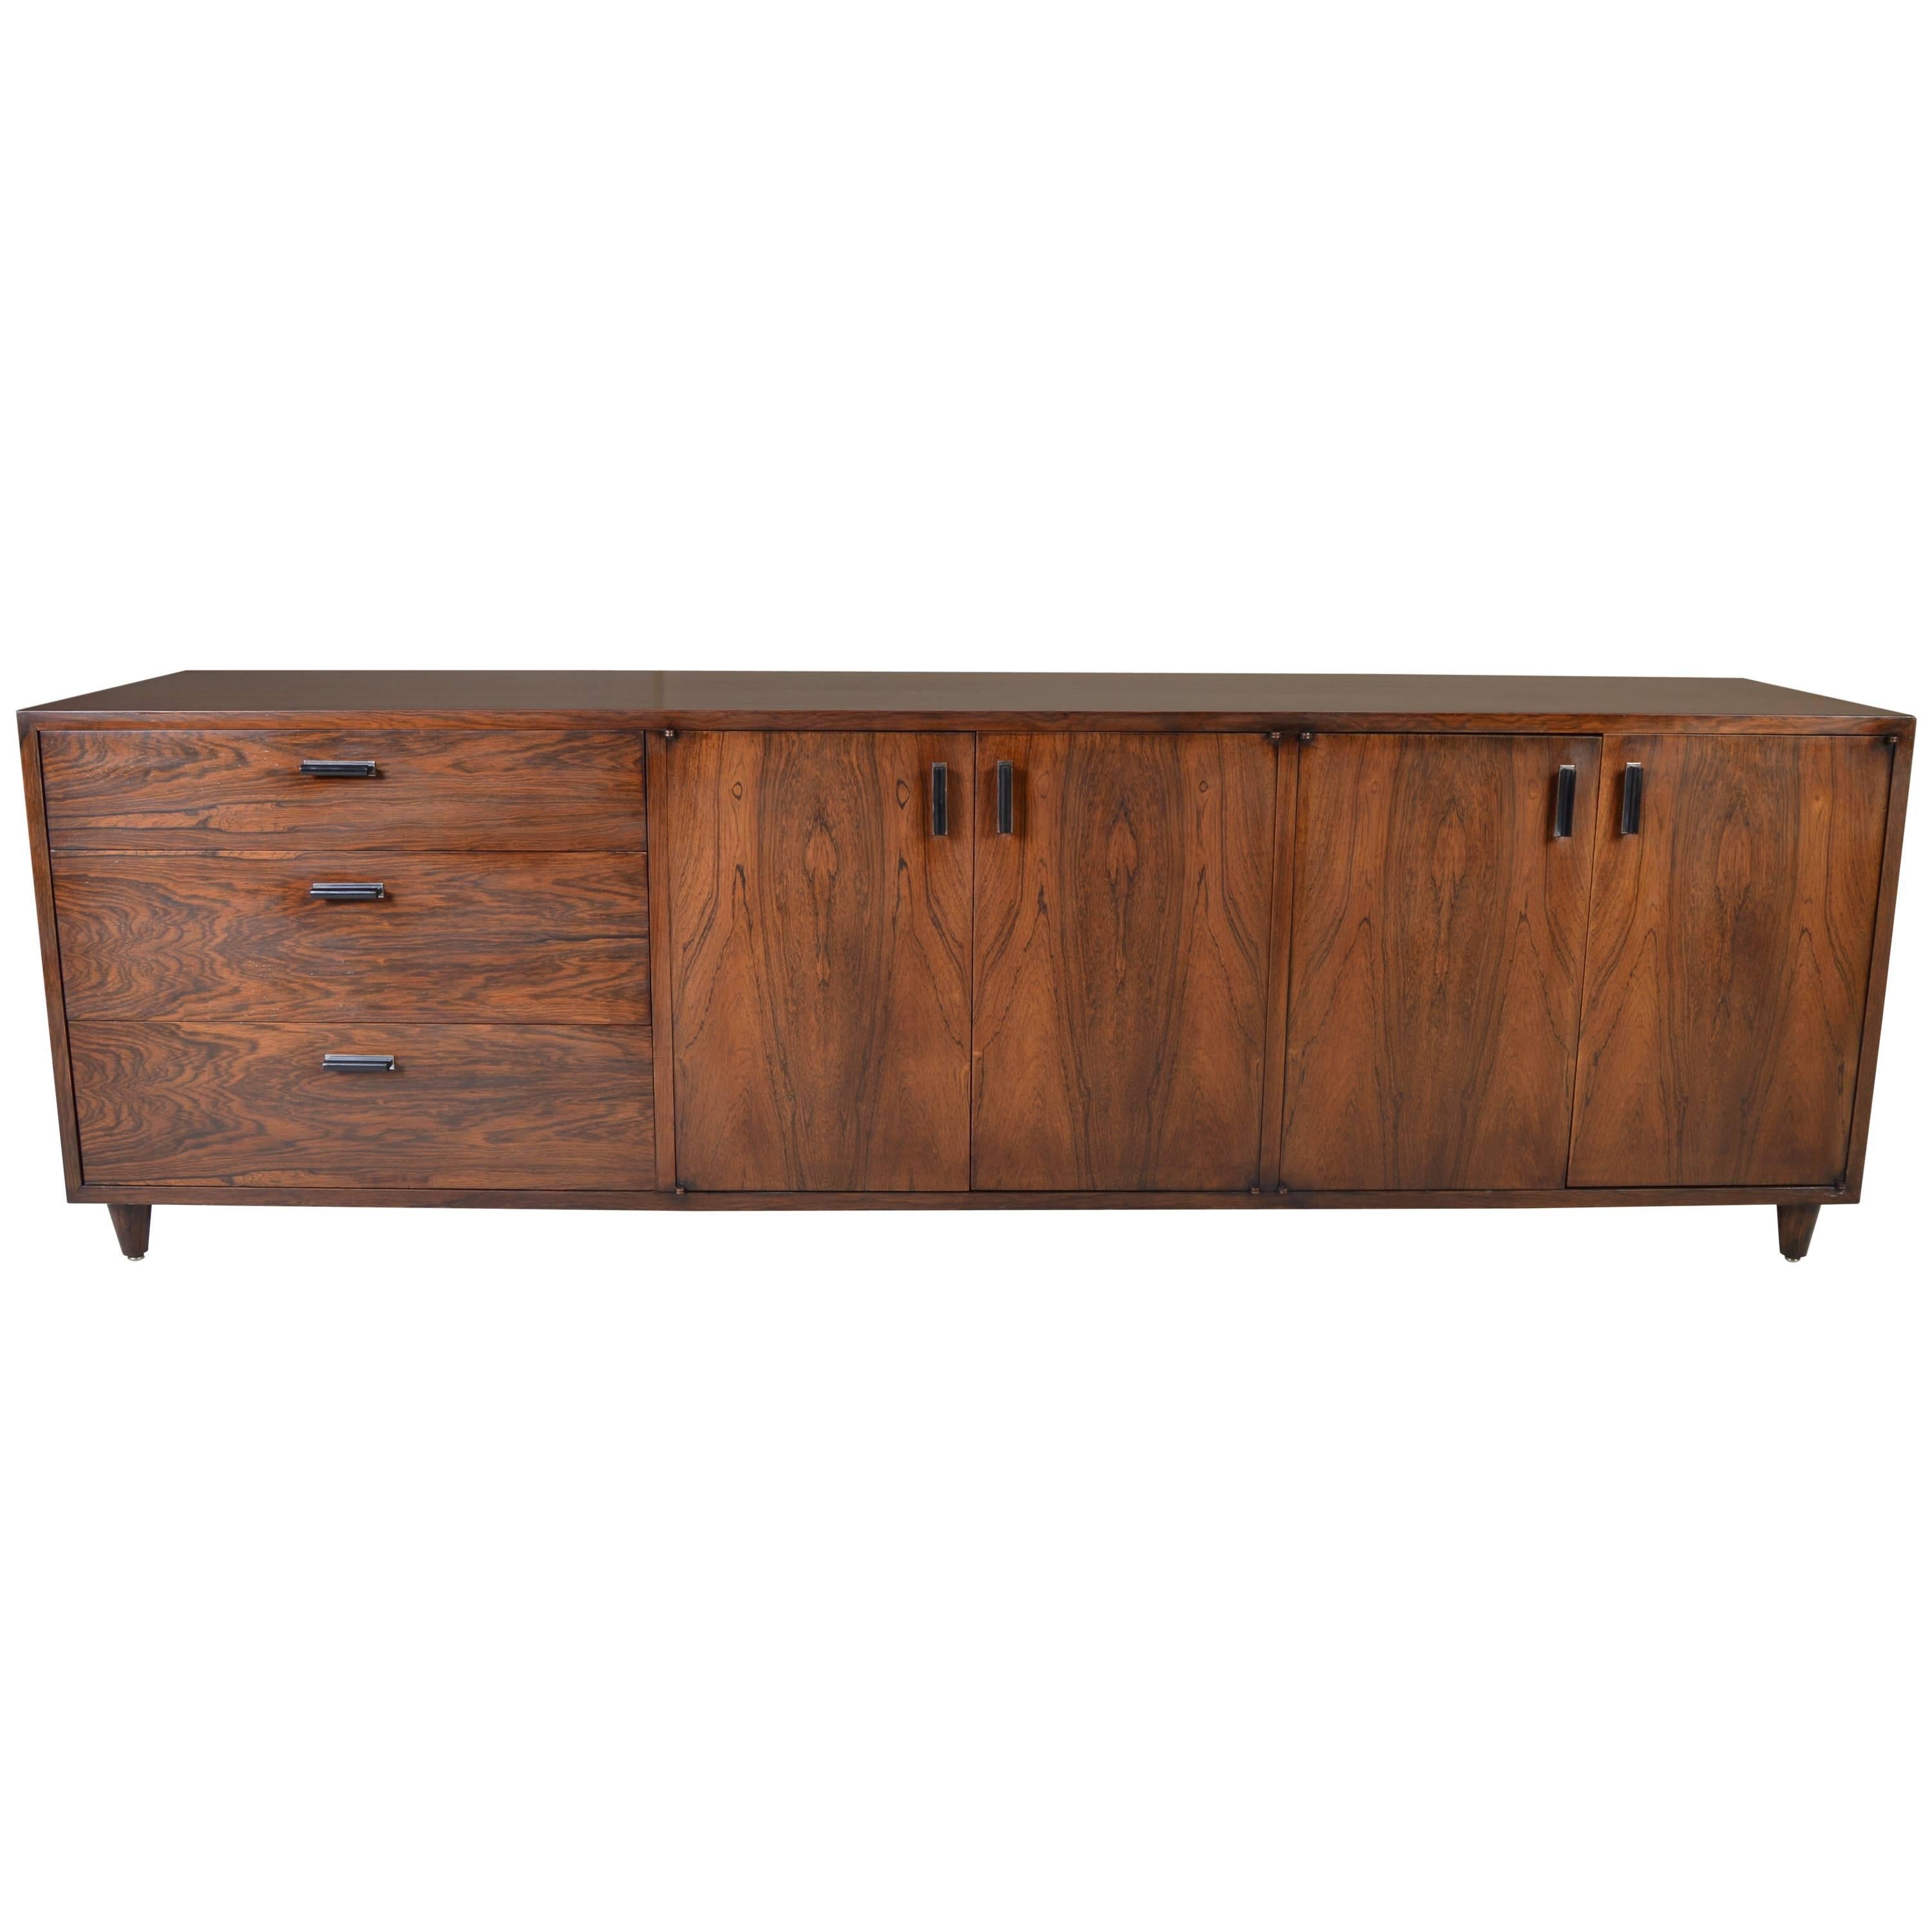 Early Mid-Century Rosewood Credenza by Founders after George Nelson